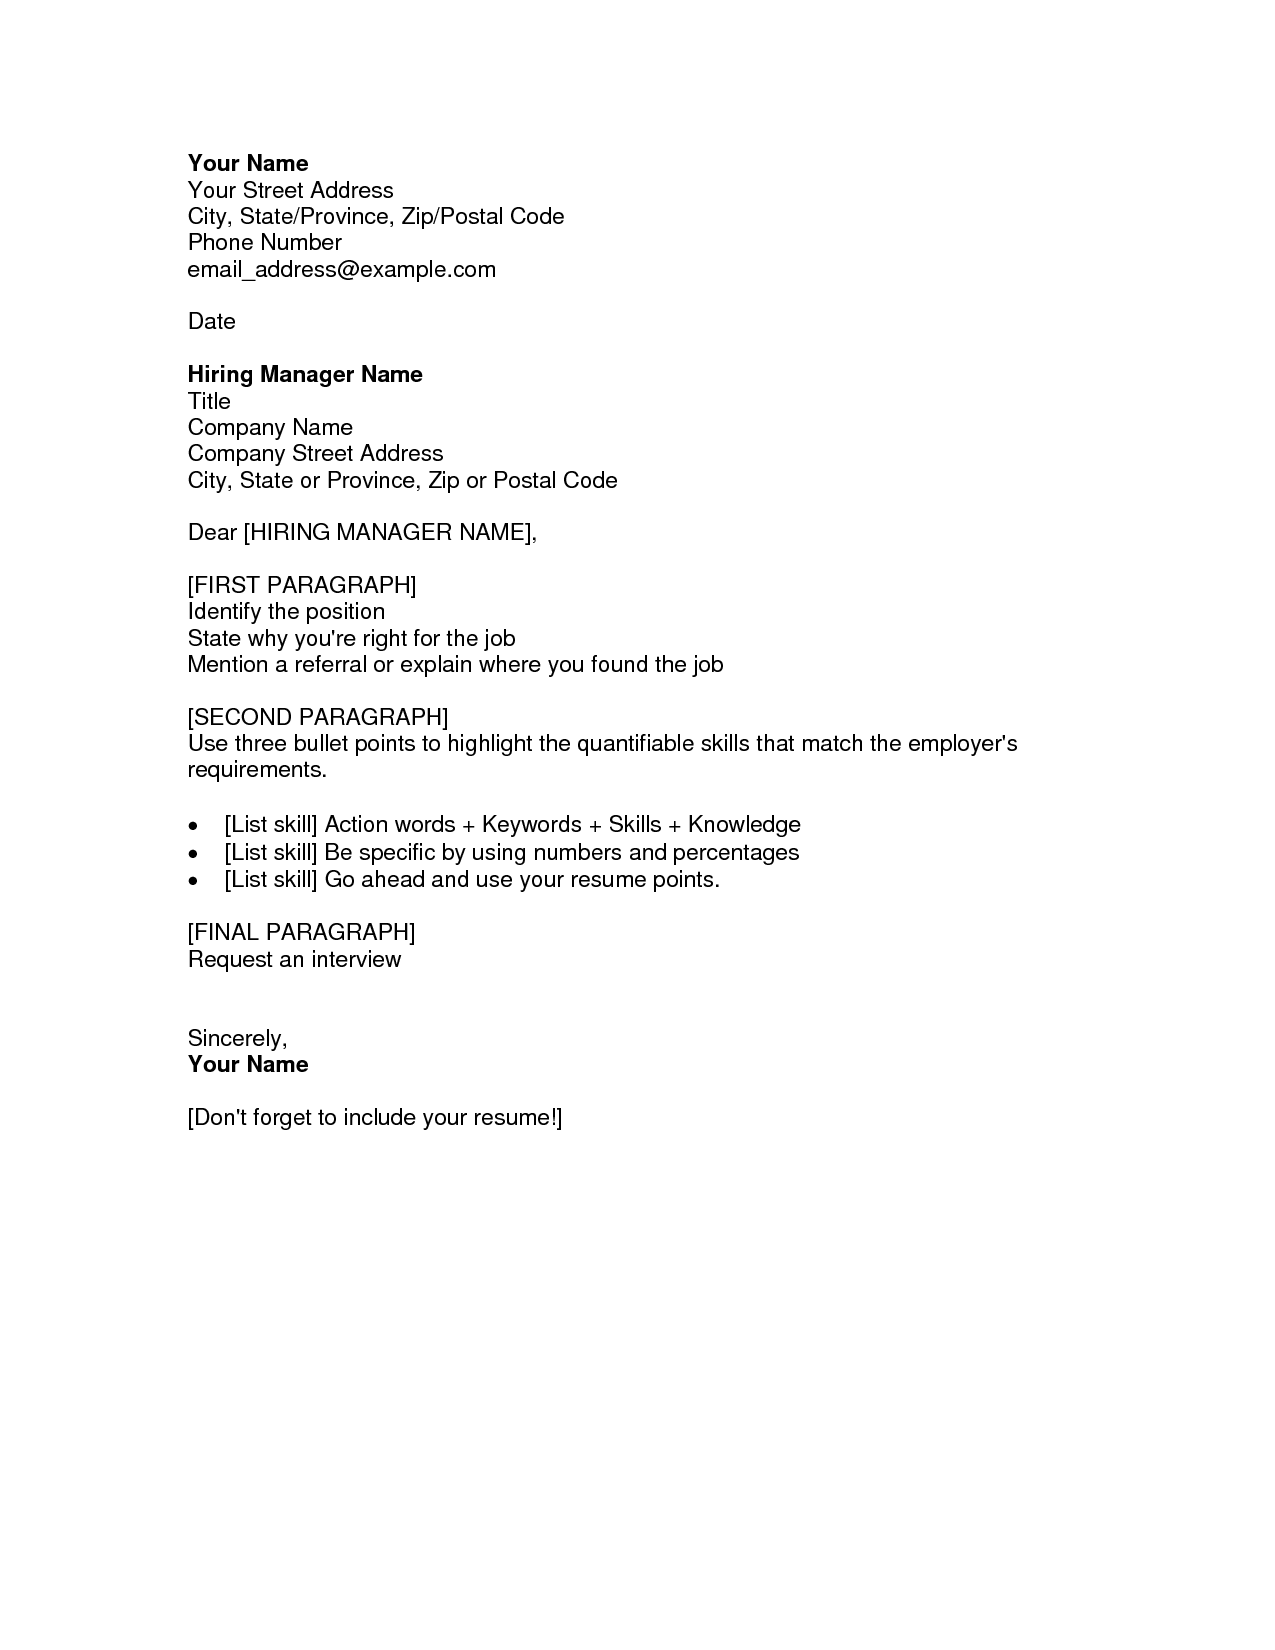 Executive/CEO Sample Cover Letter